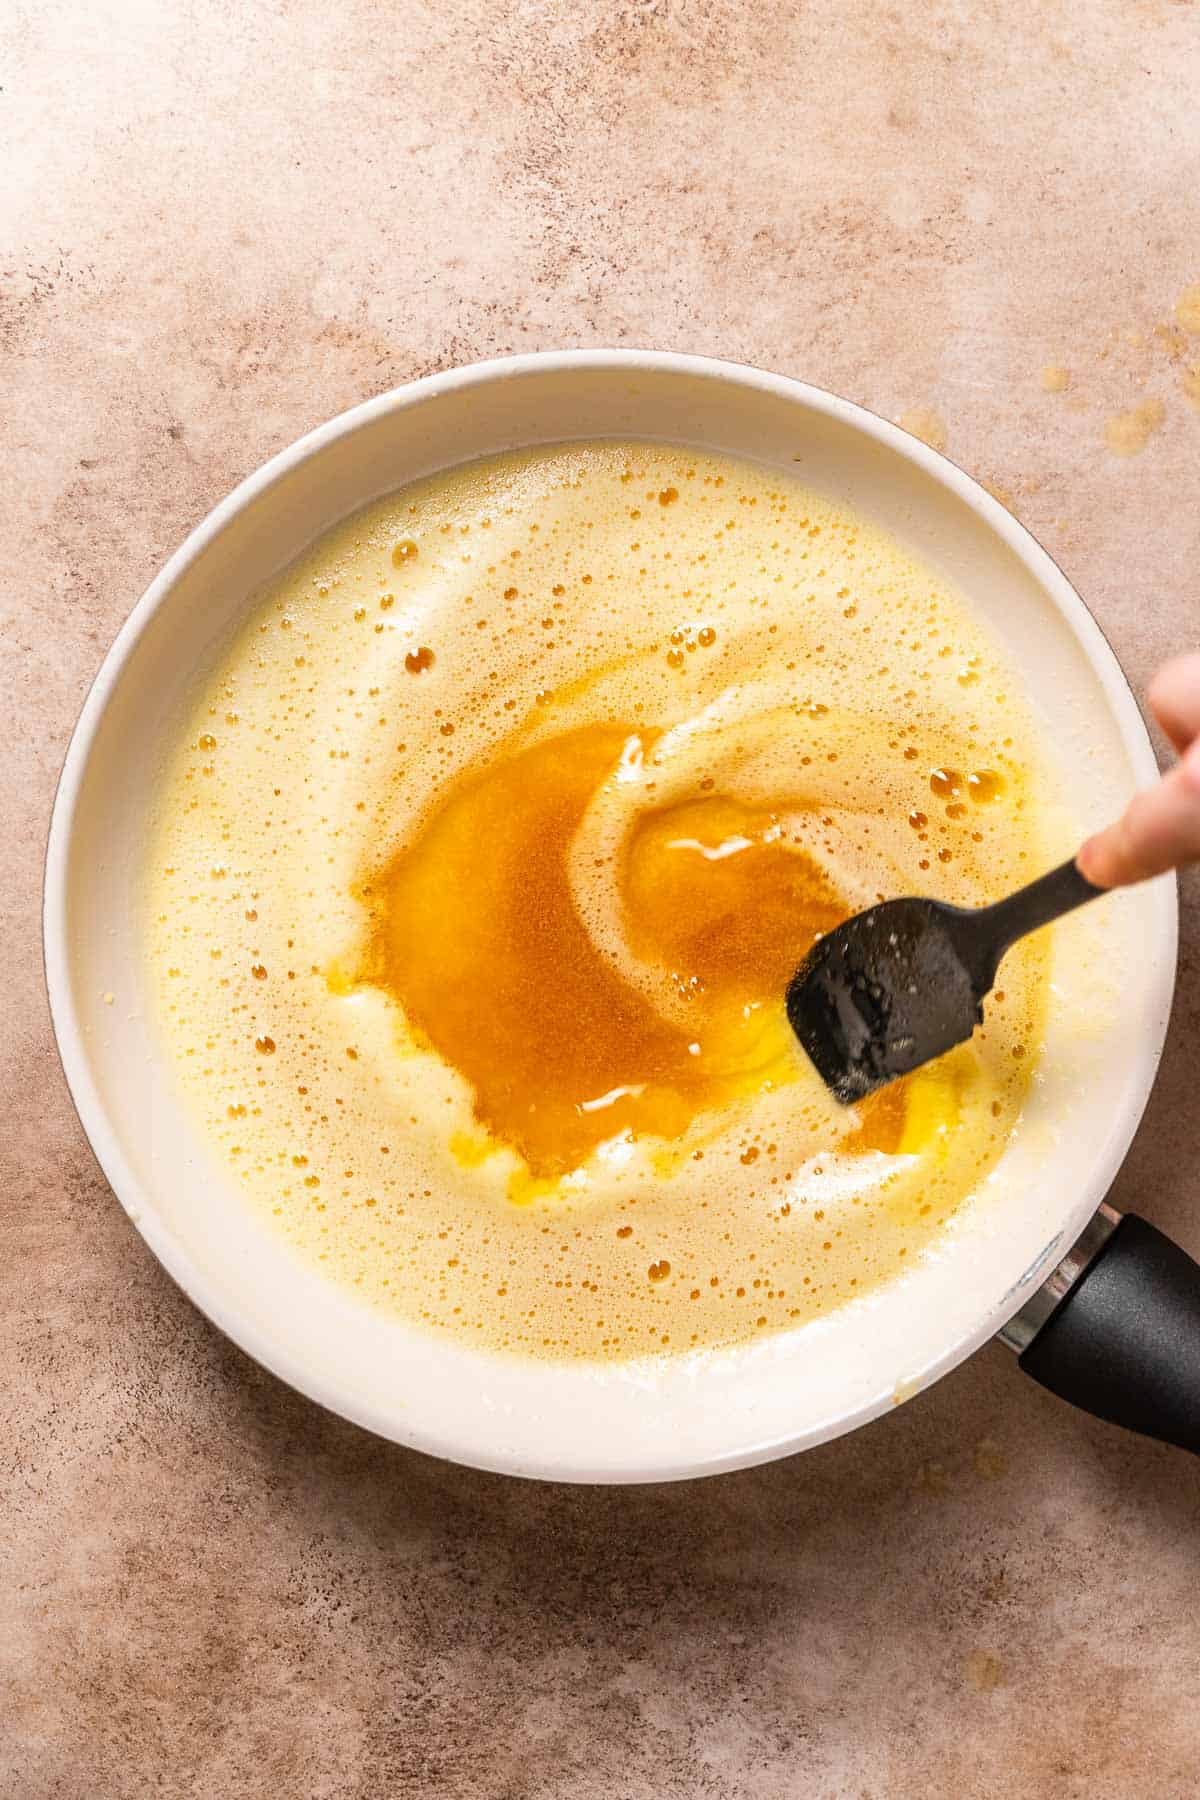 A hand stirring the melted butter in a pan to show the browned milk solids.